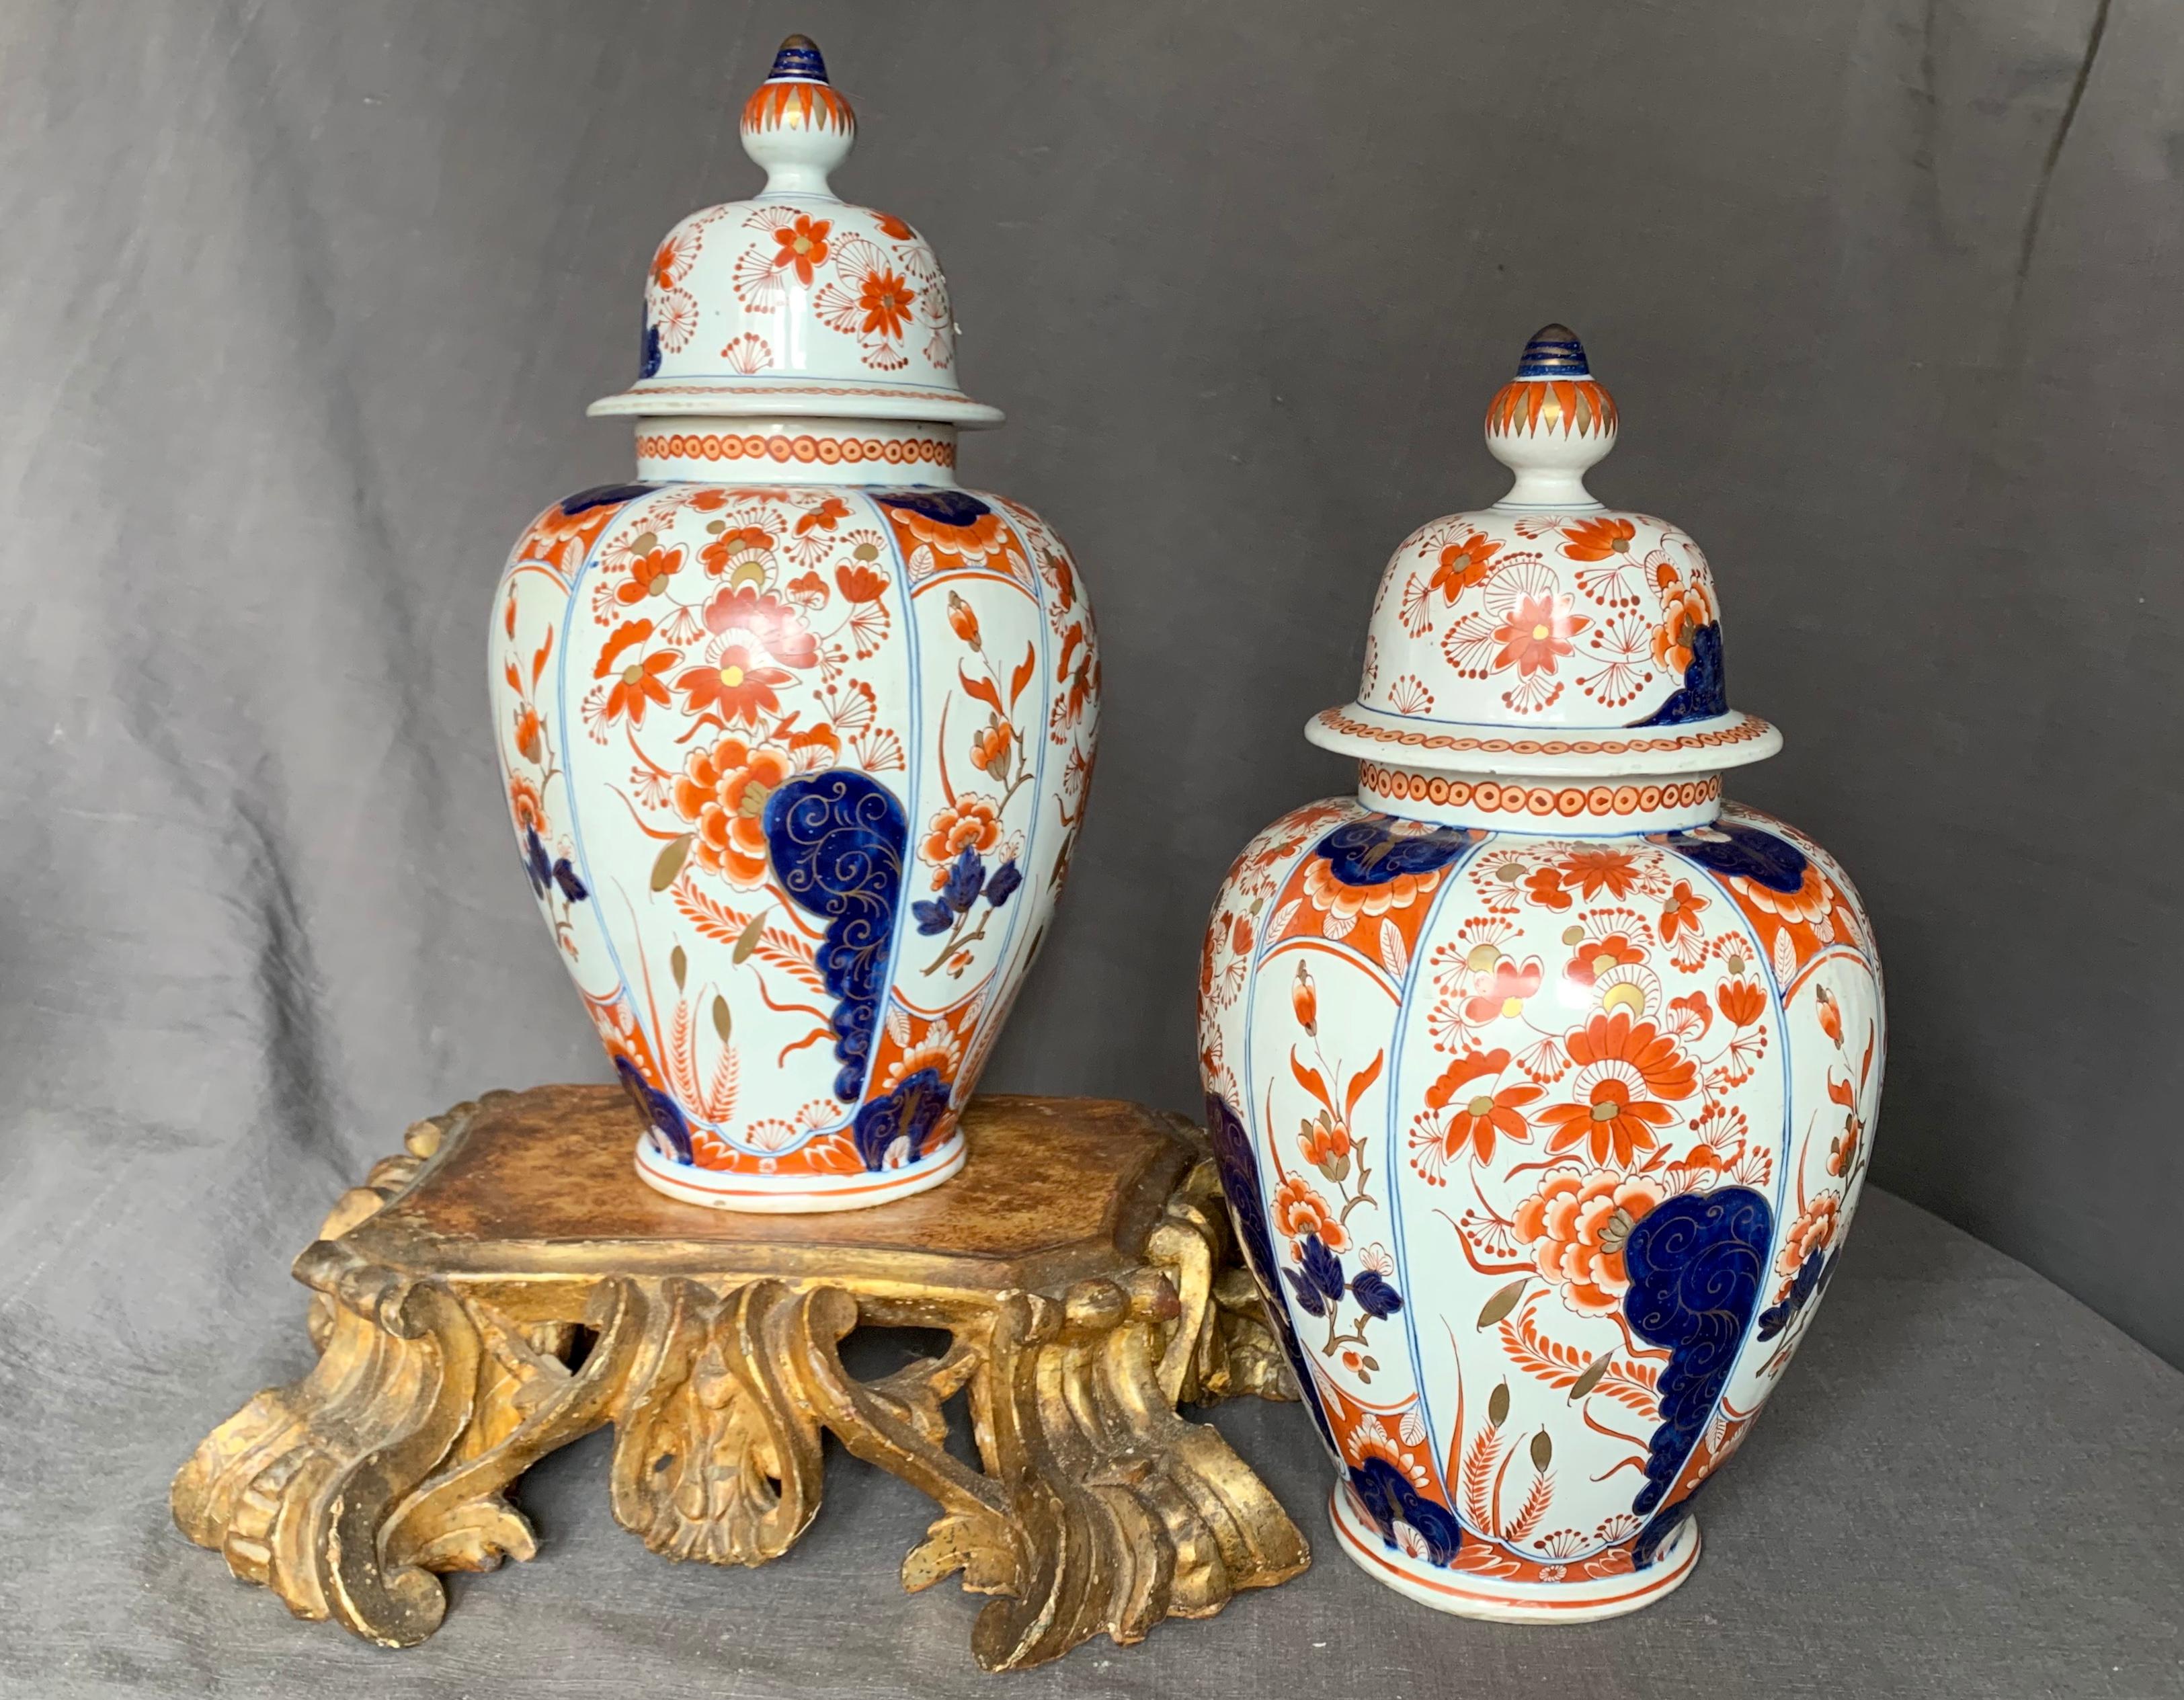 Pair Delft style Imari ginger jars. Orange, blue and gilt Imari style decoration ornaments this pair of French pottery lidded vases made by Aprey and retailed by Maison Roussat in Orleans. France, late 19th century.
Dimensions: 14.75